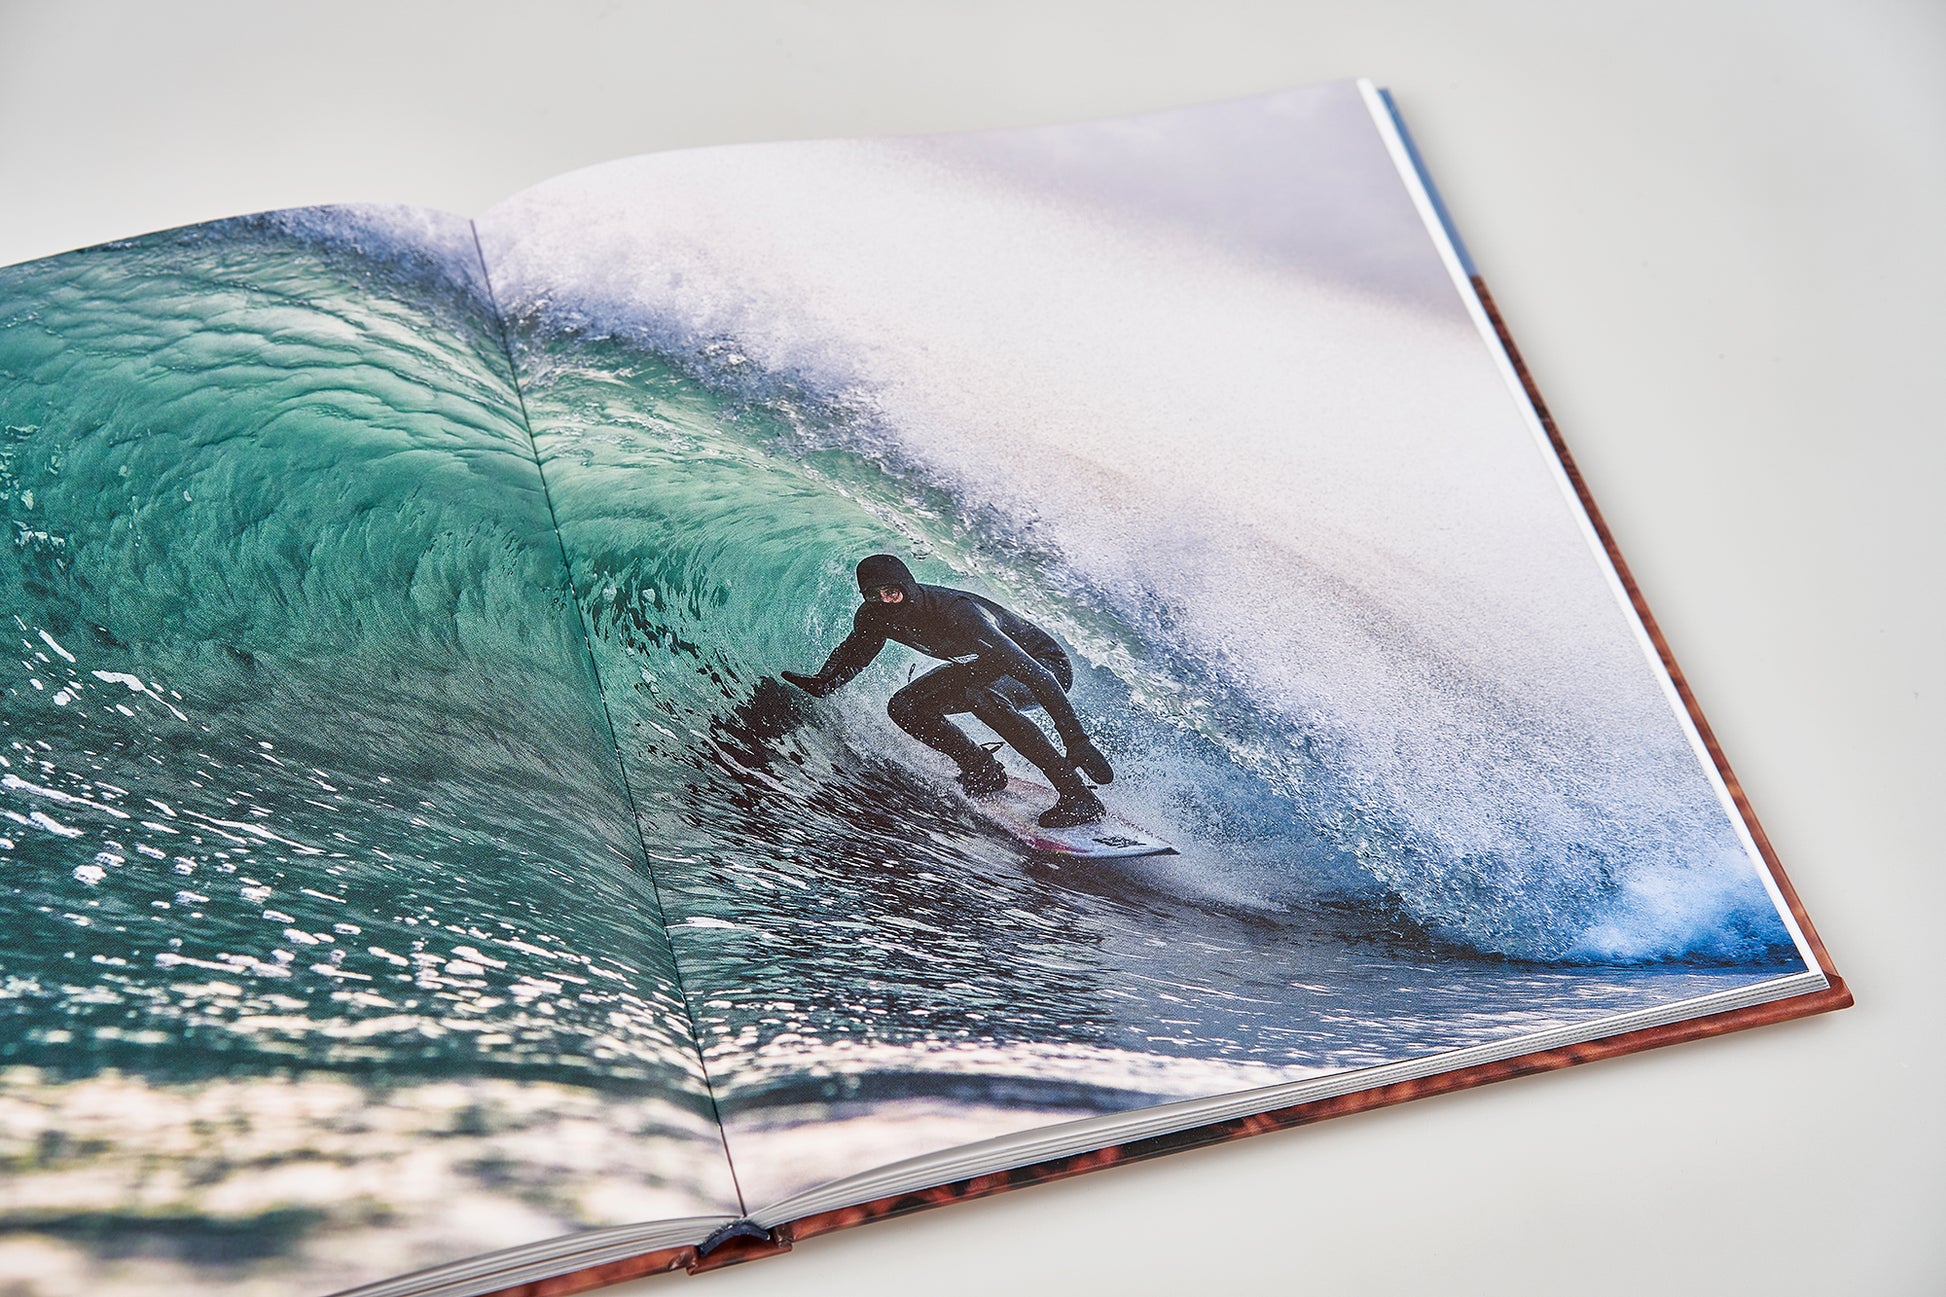 Island X- A photography book by Mark McInnis- Standard edition open to a surfing photo.